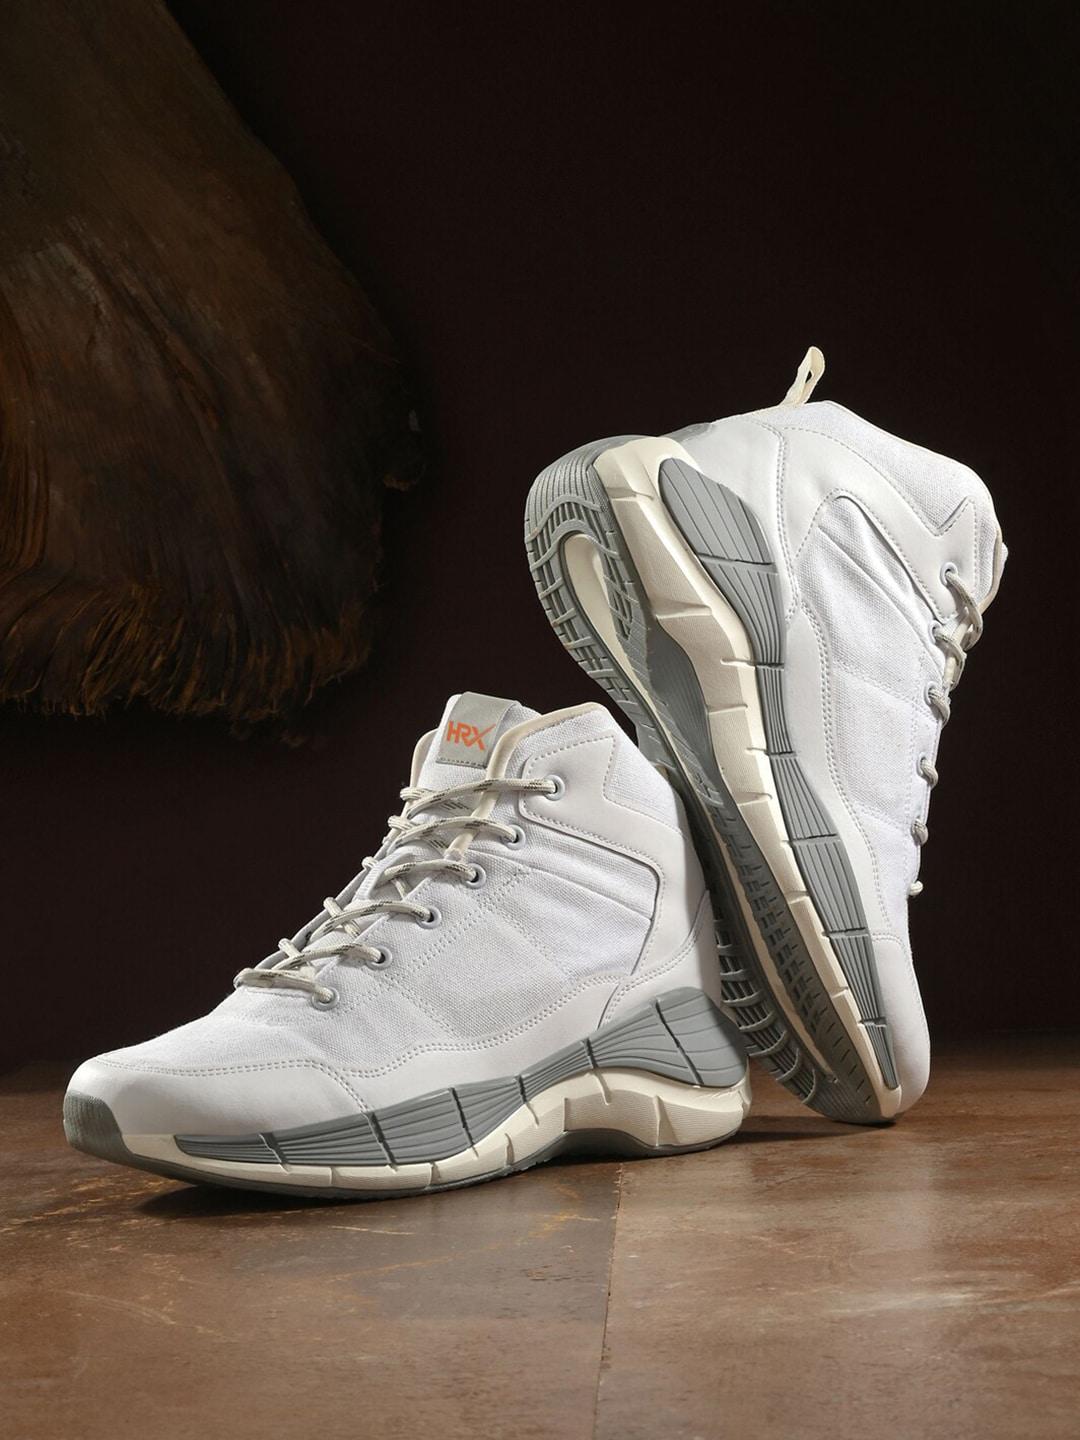 hrx-by-hrithik-roshan-men-white-mid-top-lace-up-basketball-shoes